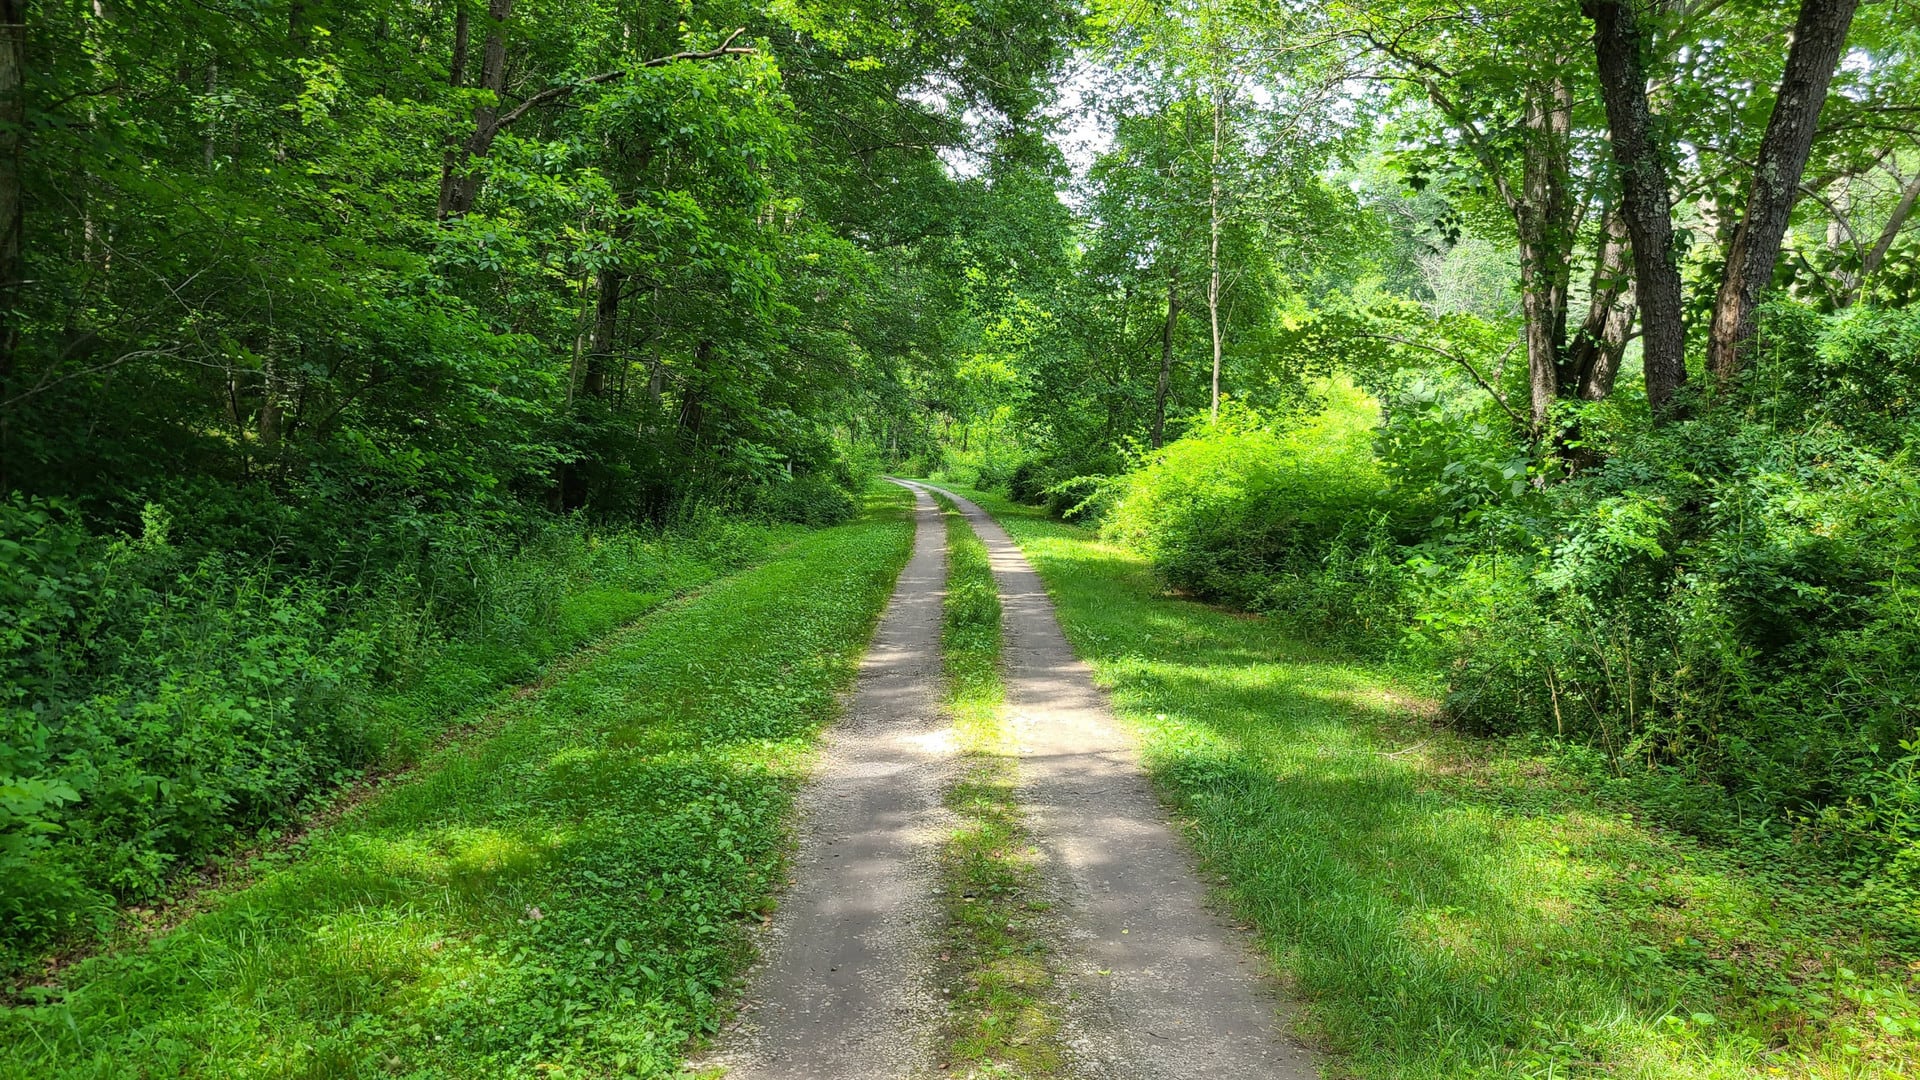 A two-lane trail, similar to one left by an off-road vehicle, runs through the woods. The trail bends to the left in the distance.